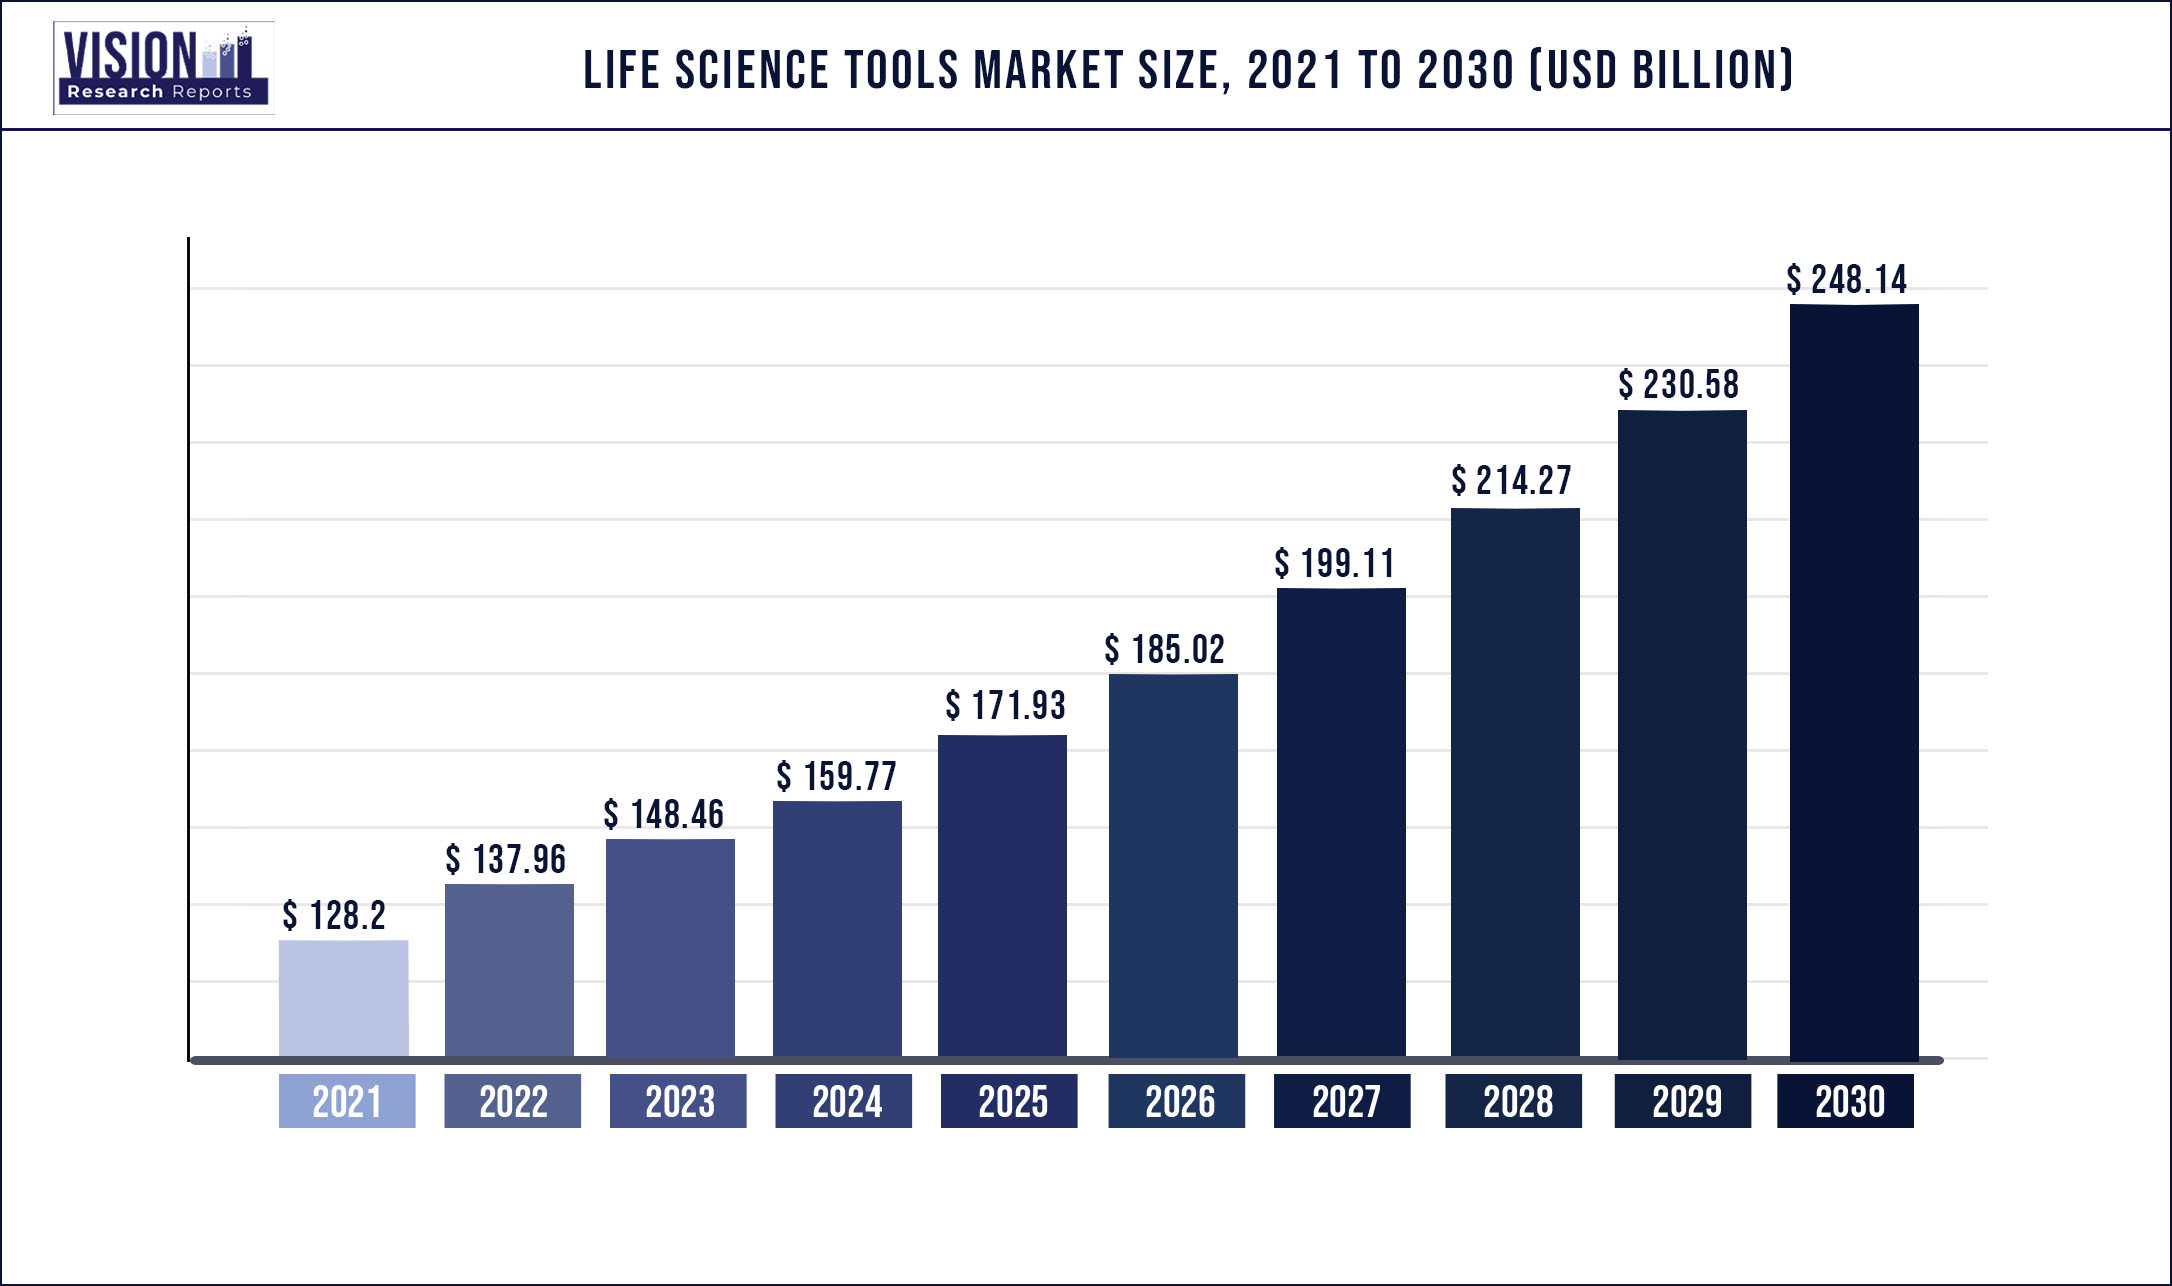 Life Science Tools Market Size 2021 to 2030